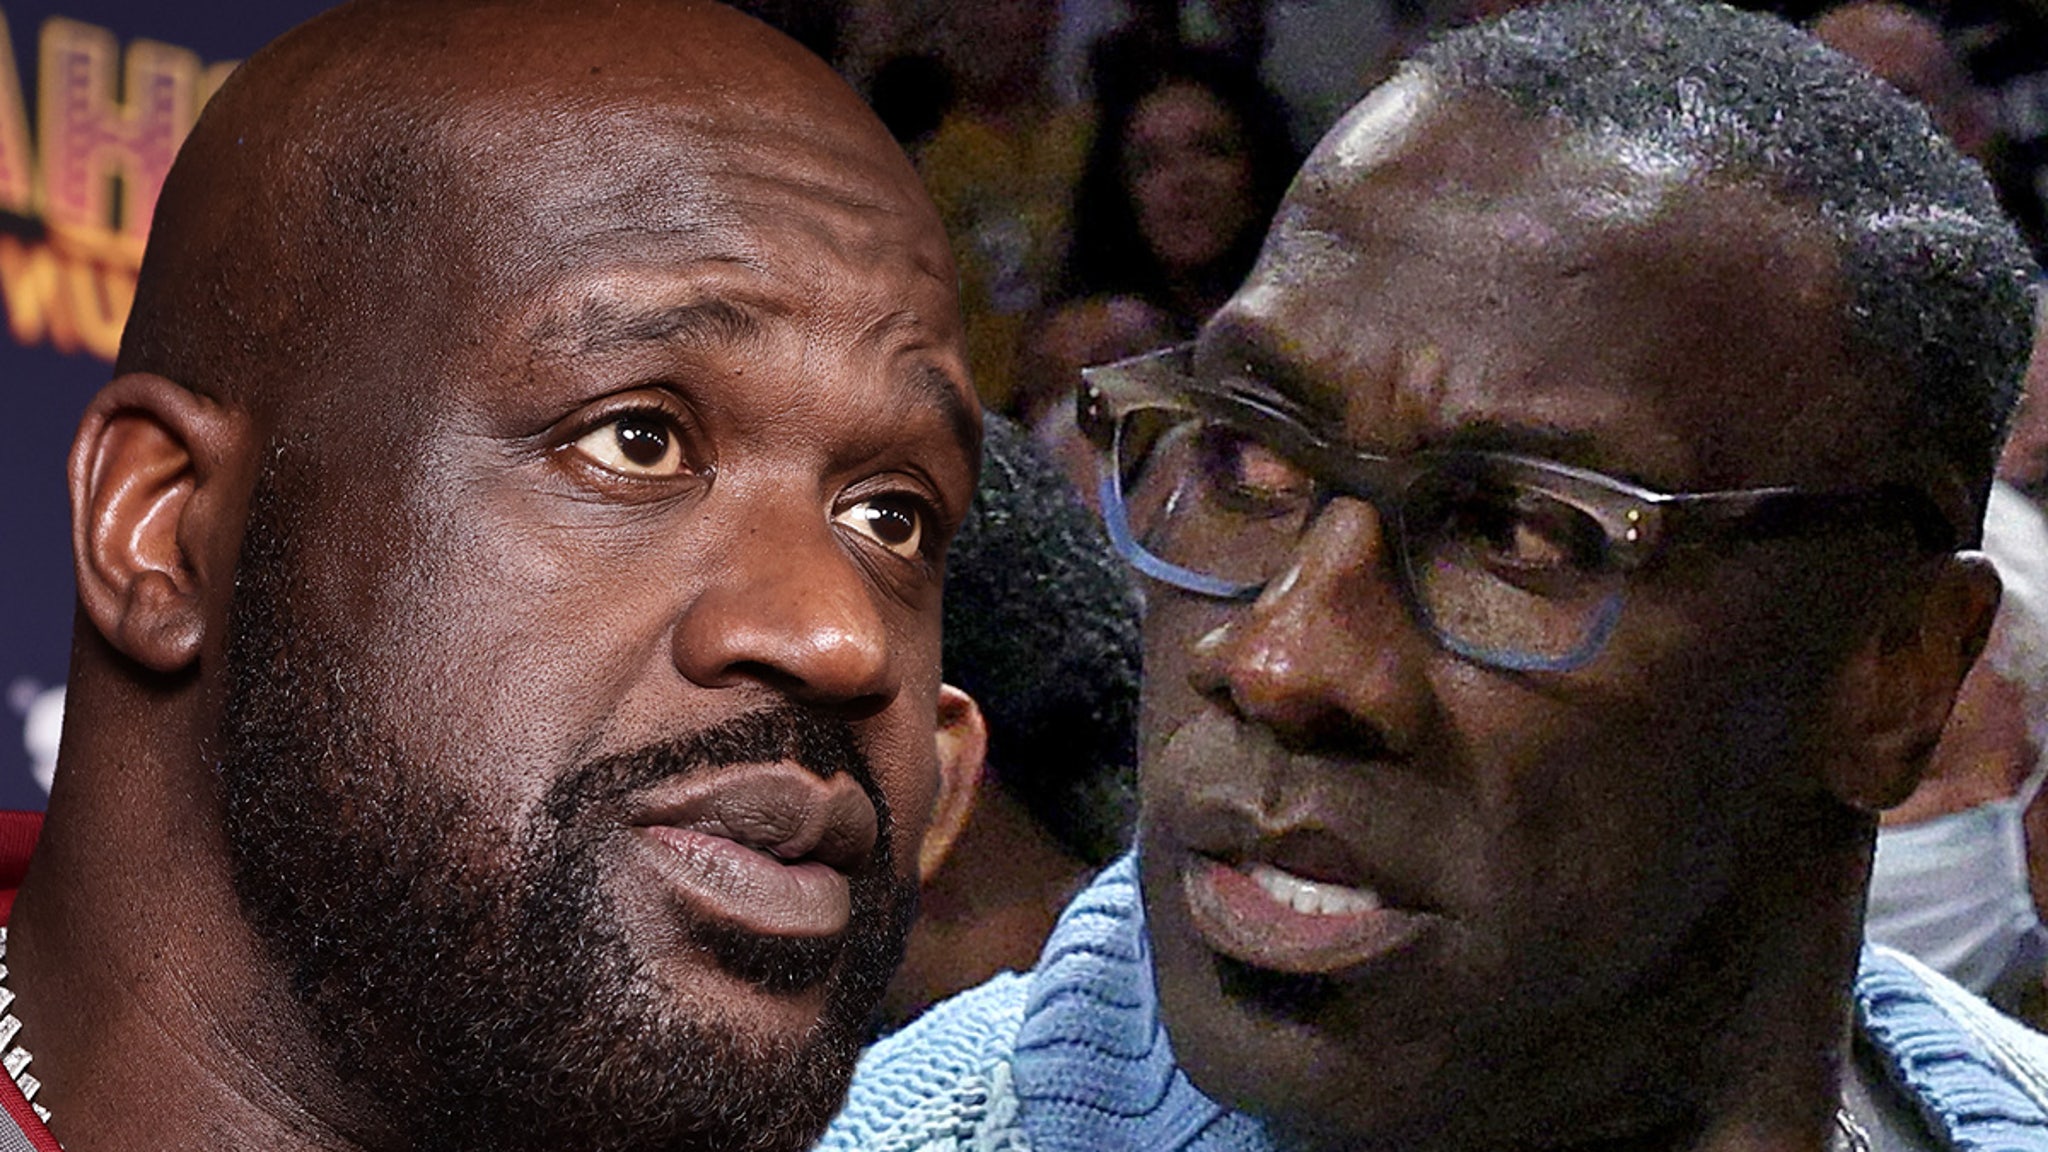 Shaquille O'Neal Goes In On Shannon Sharpe, 'I'm Better Than You'